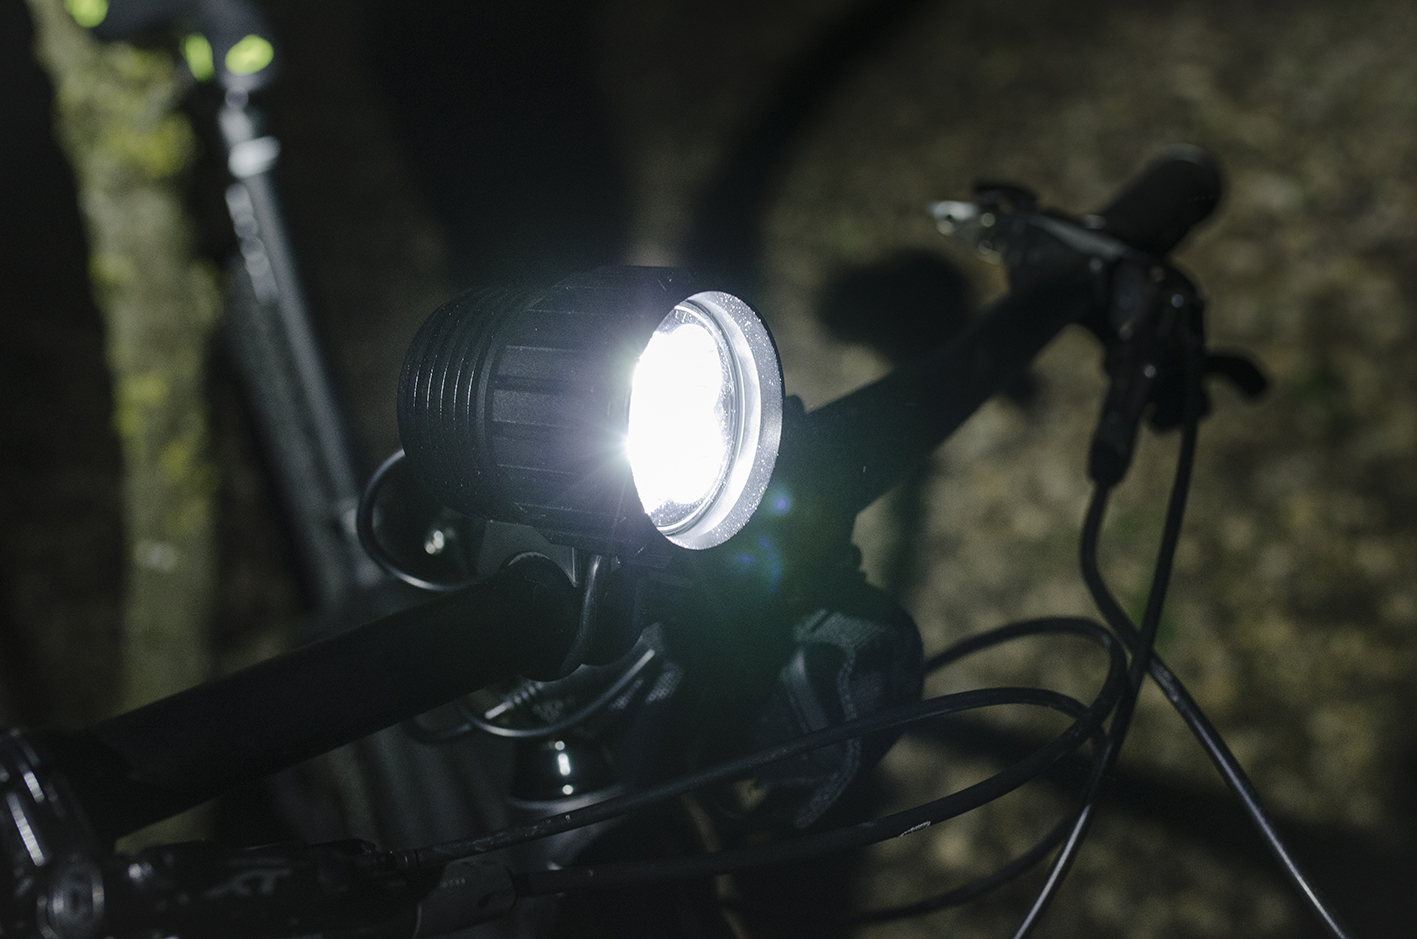 LIGHT-UP YOUR EXCURSIONS WITH BH BIKES